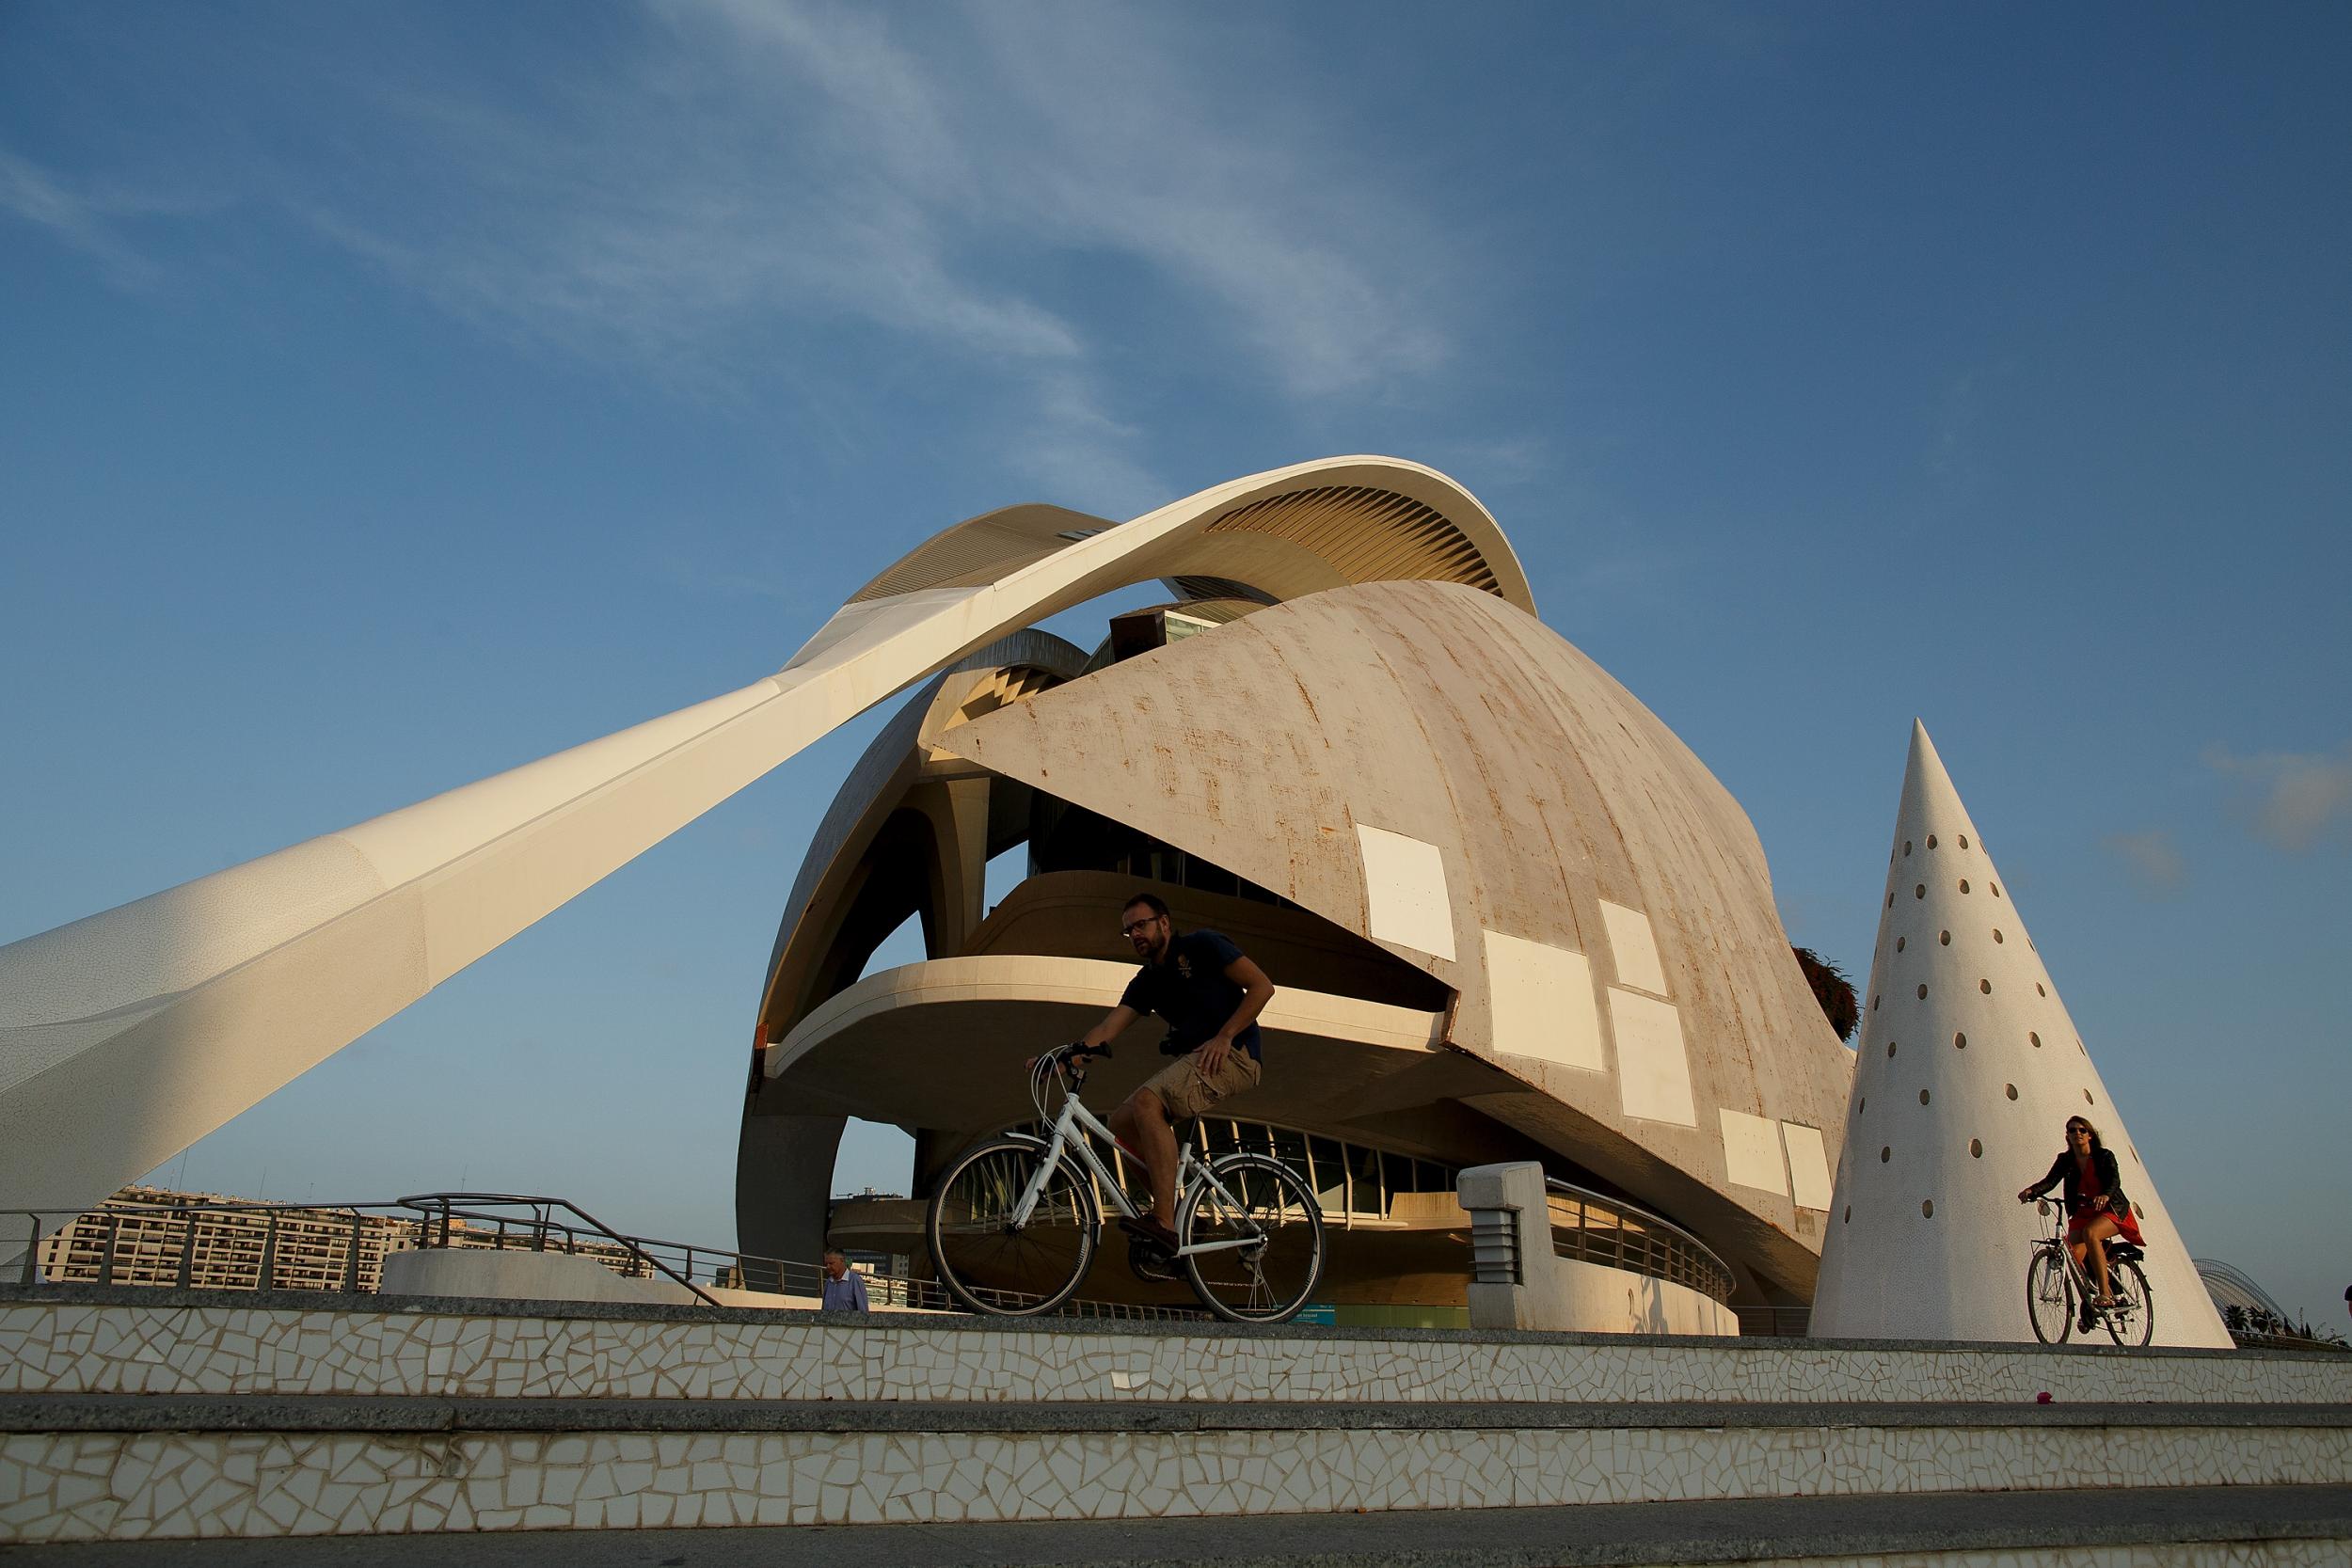 Valencia has top notch architecture, food, and bike hire to ride off the calories